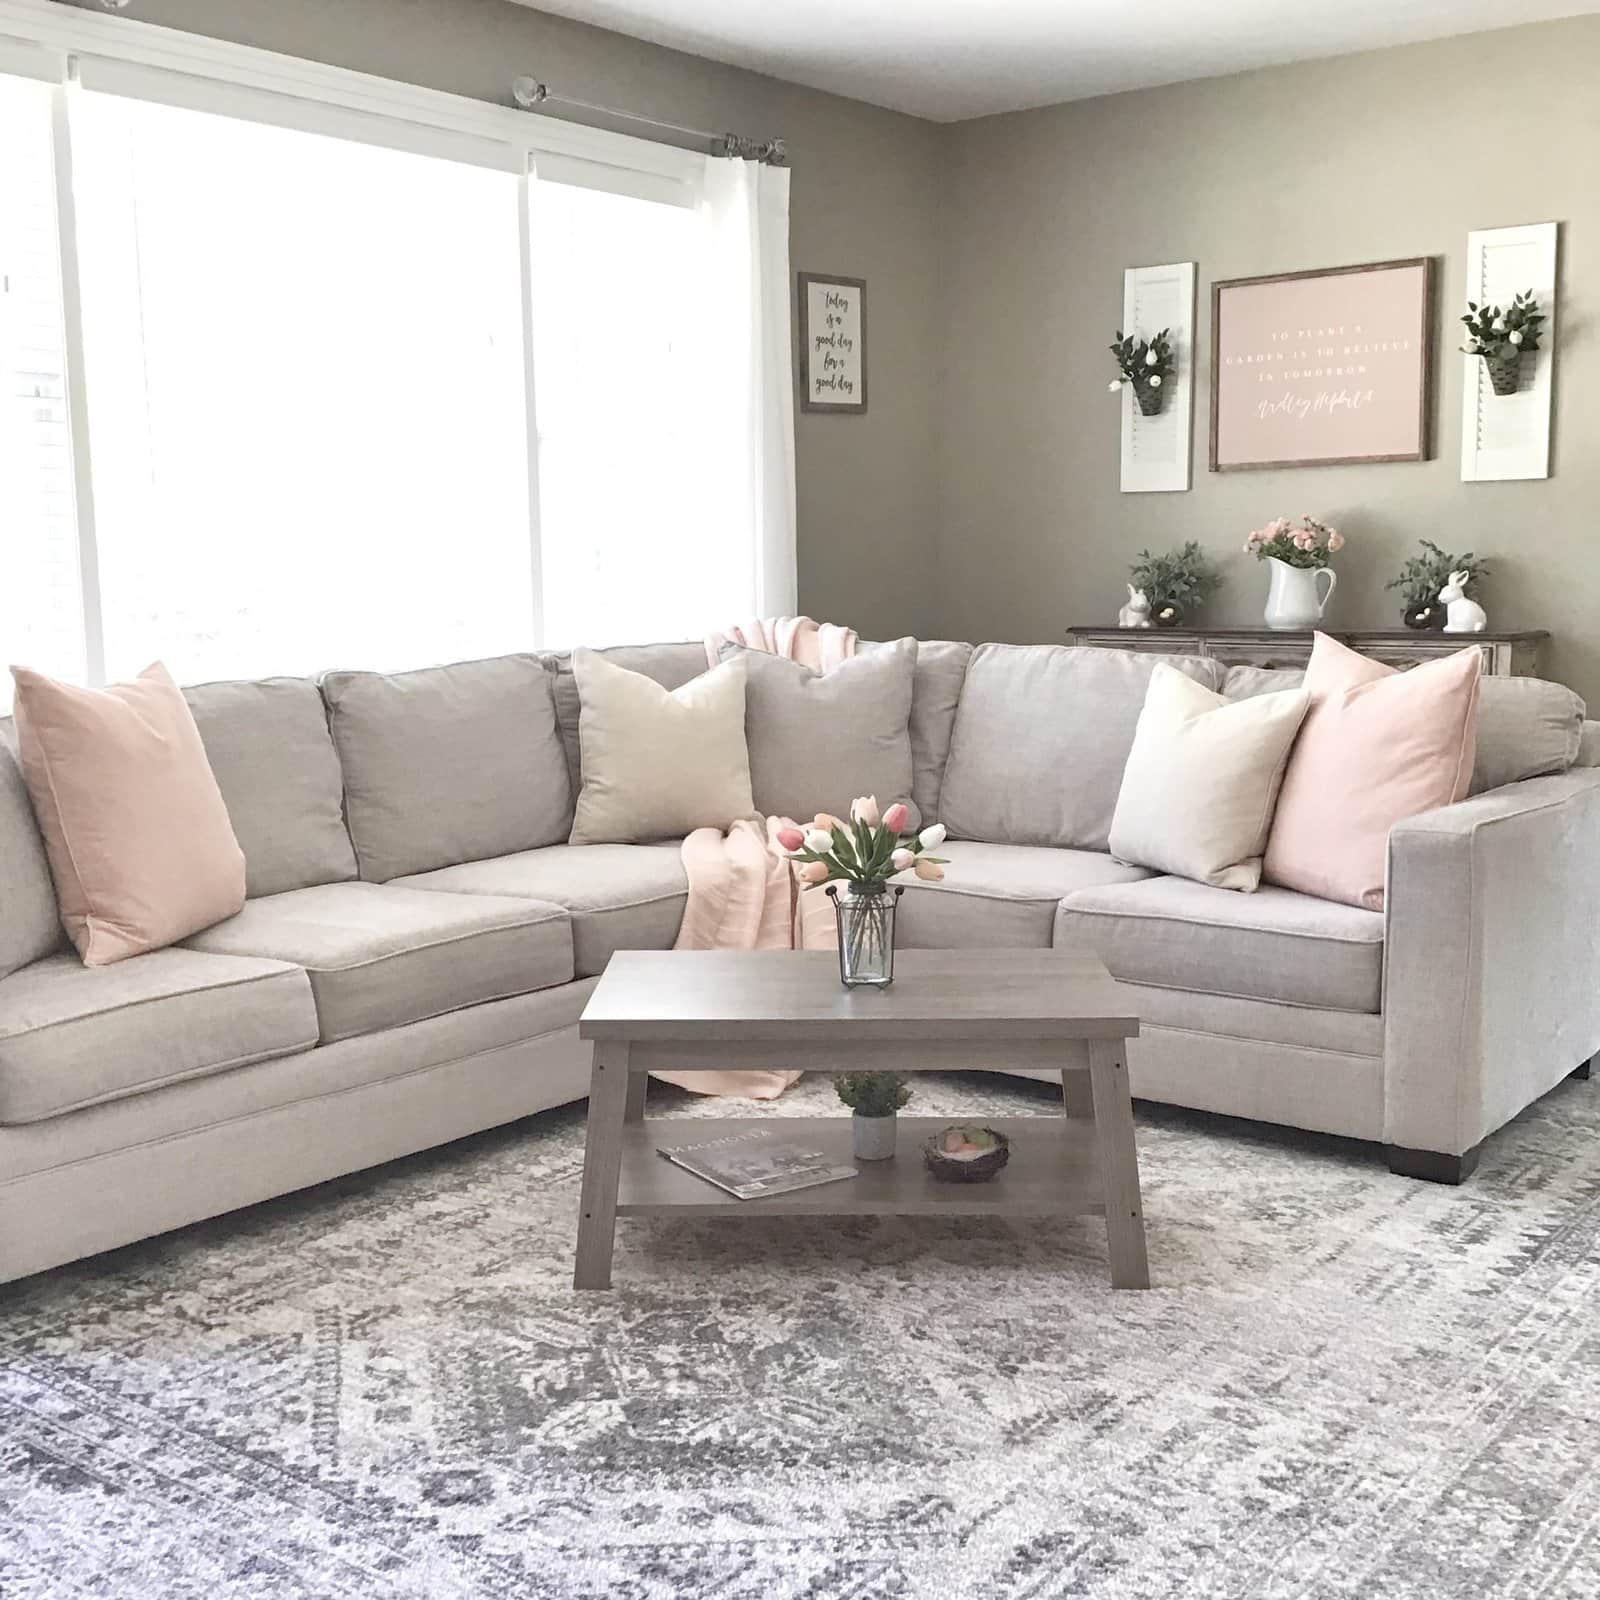 1. What to Consider When Buying Throw Pillows for a Sectional